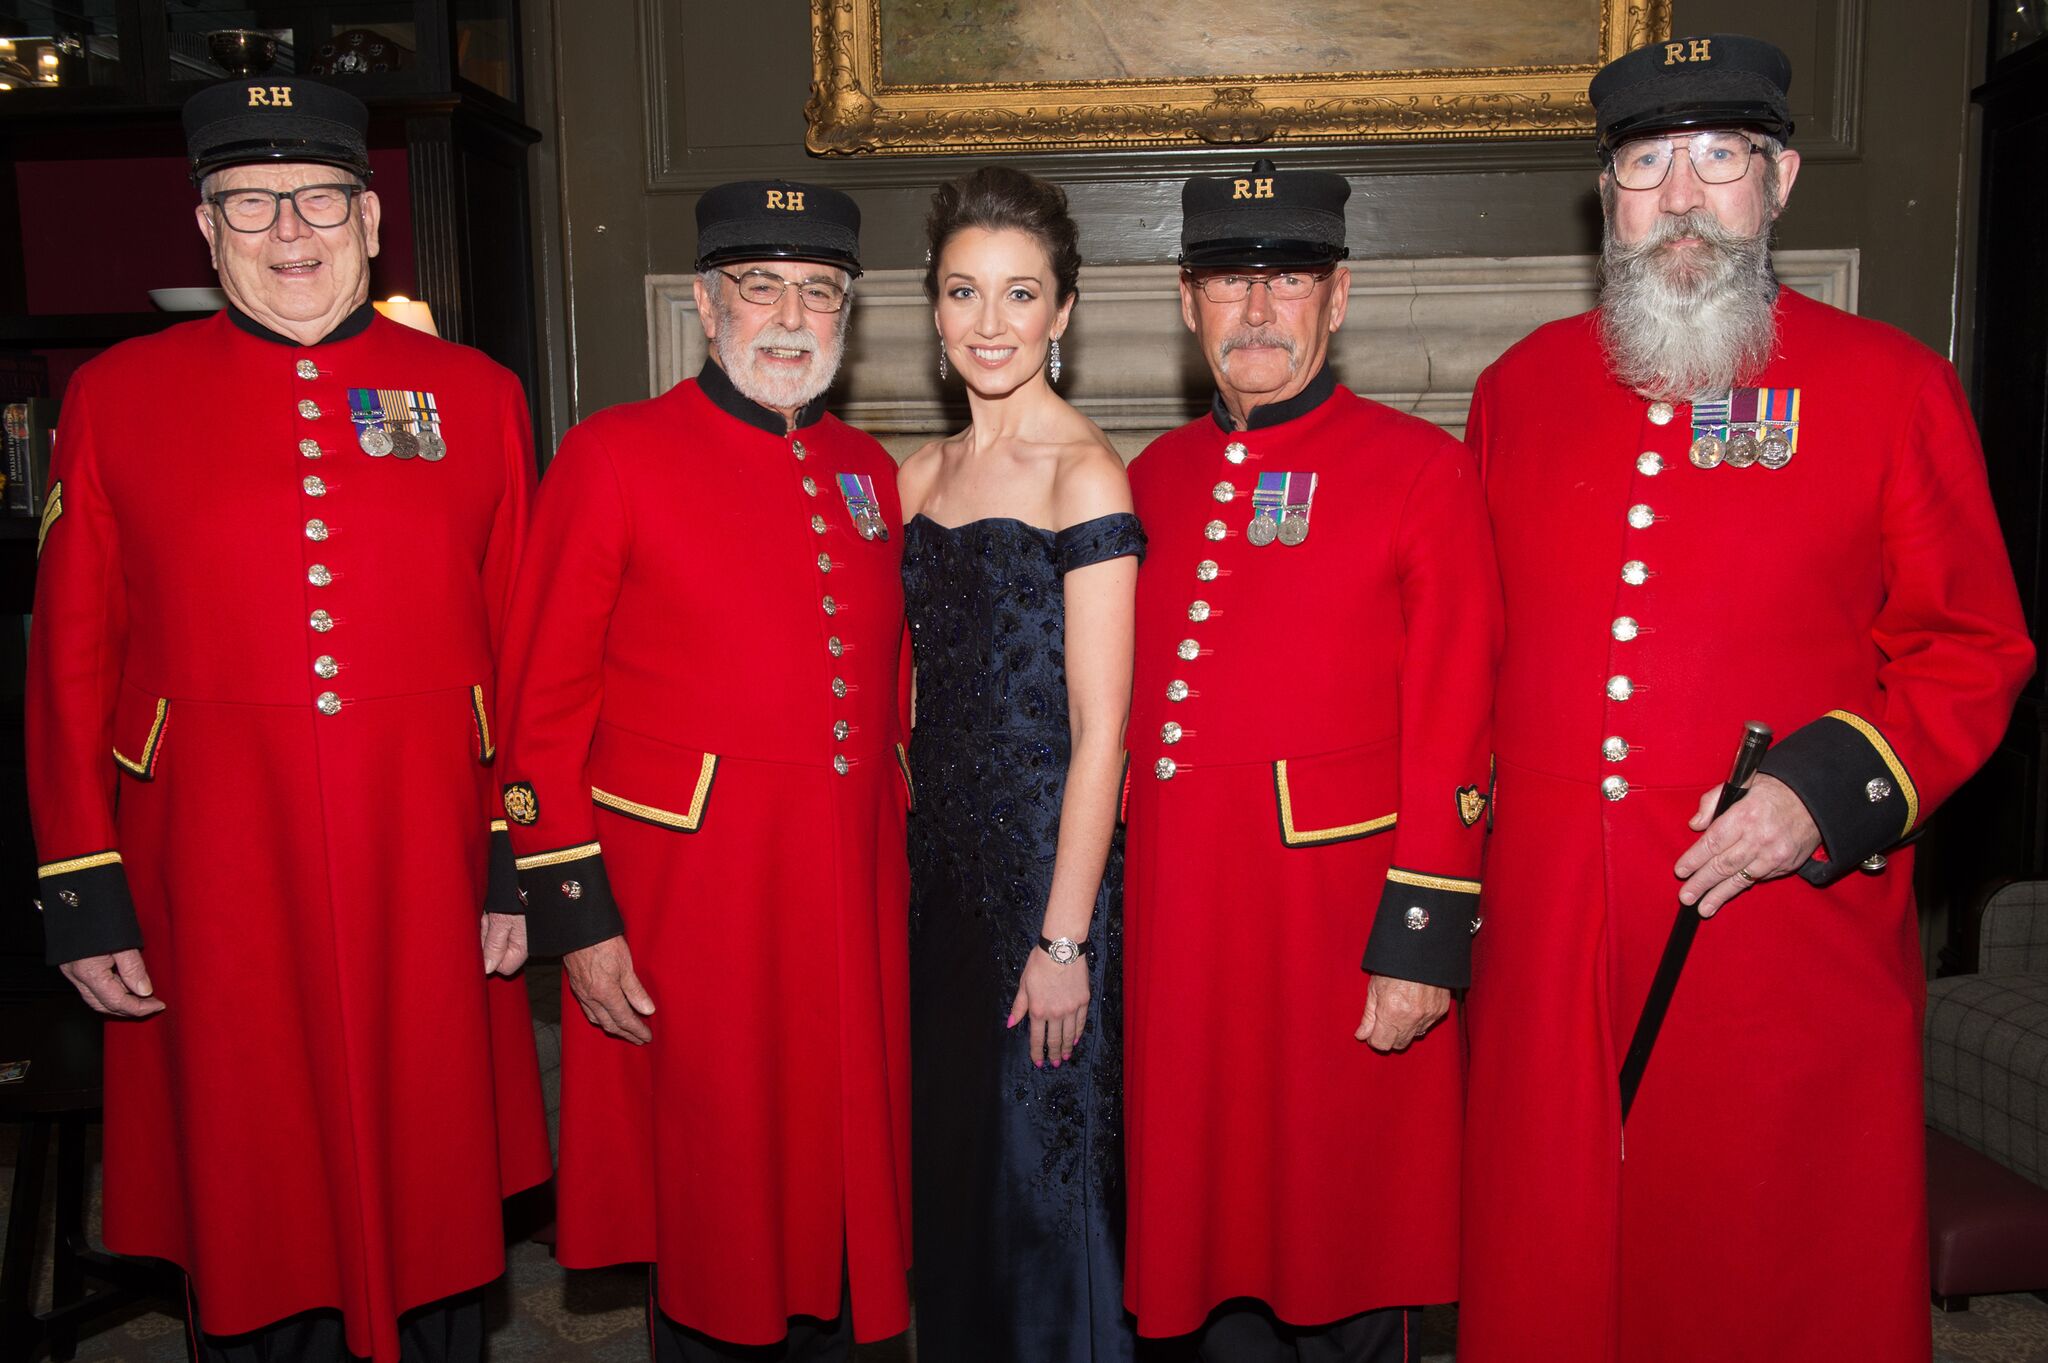 Carly Paoli Performs For The Chelsea Pensioners at Royal Hospital Chelsea